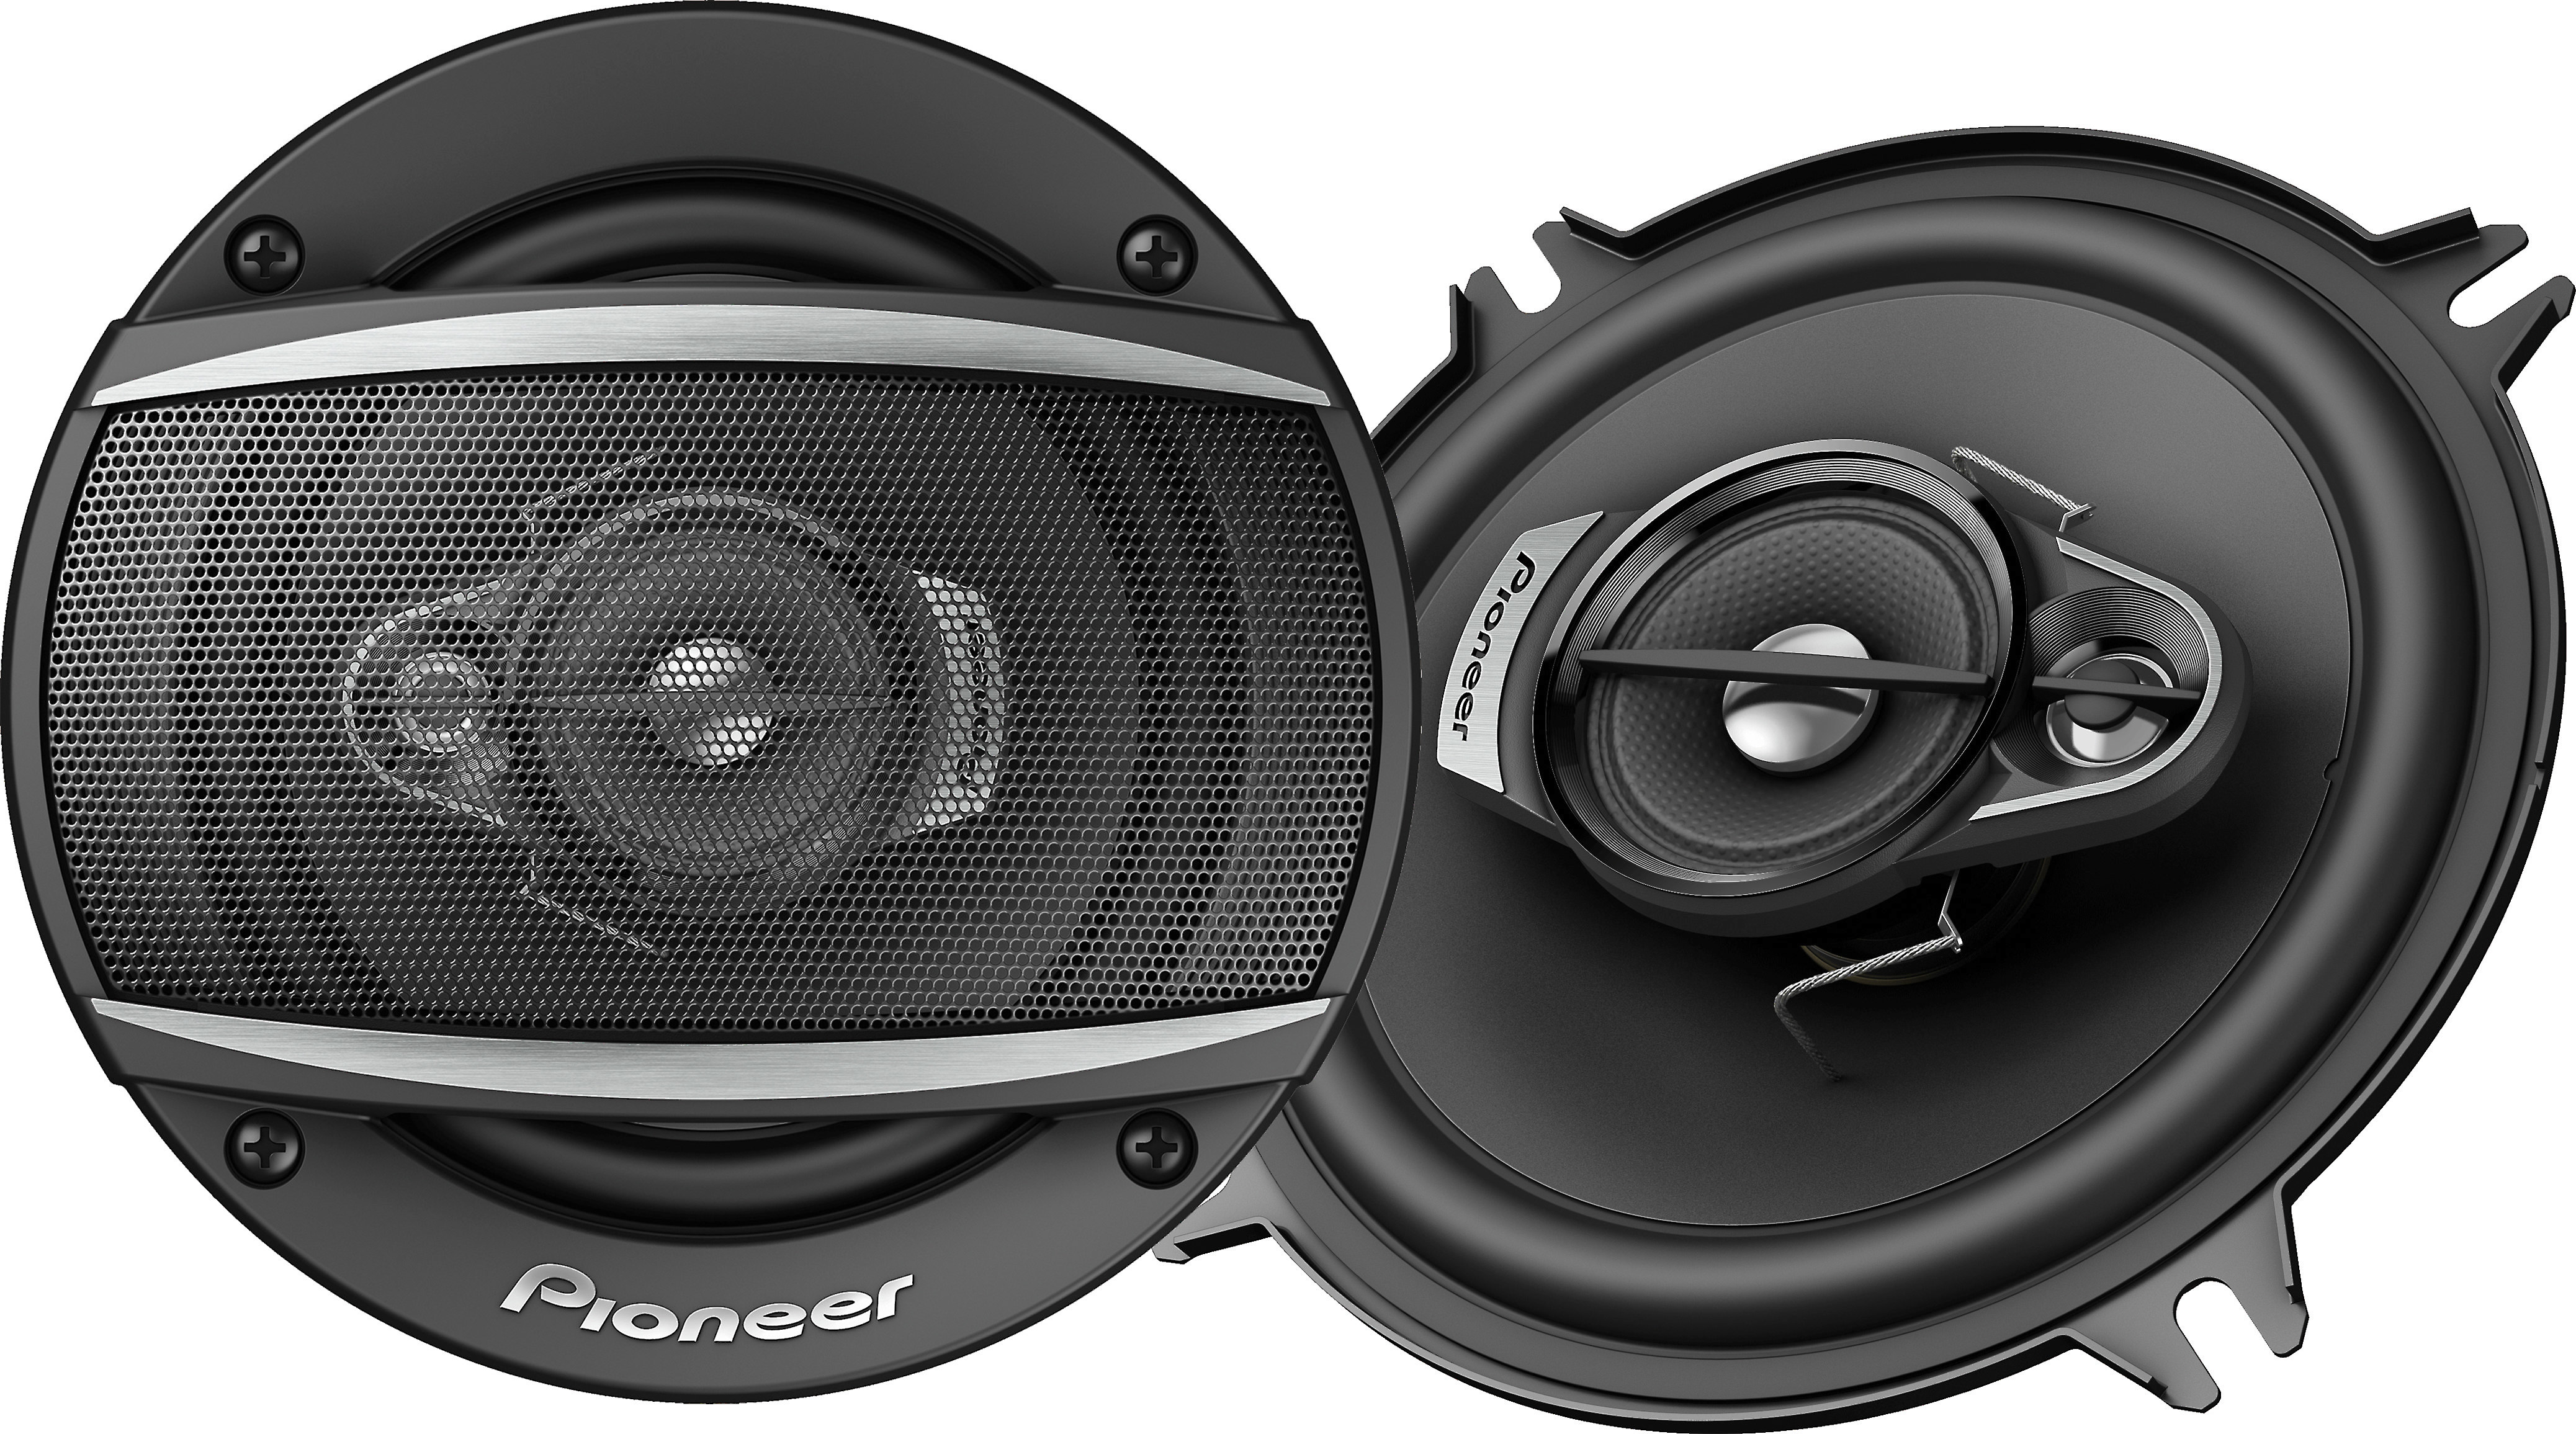 Product Pioneer TS-A1370F A-Series 5-1/4" 3-way car speakers Crutchfield